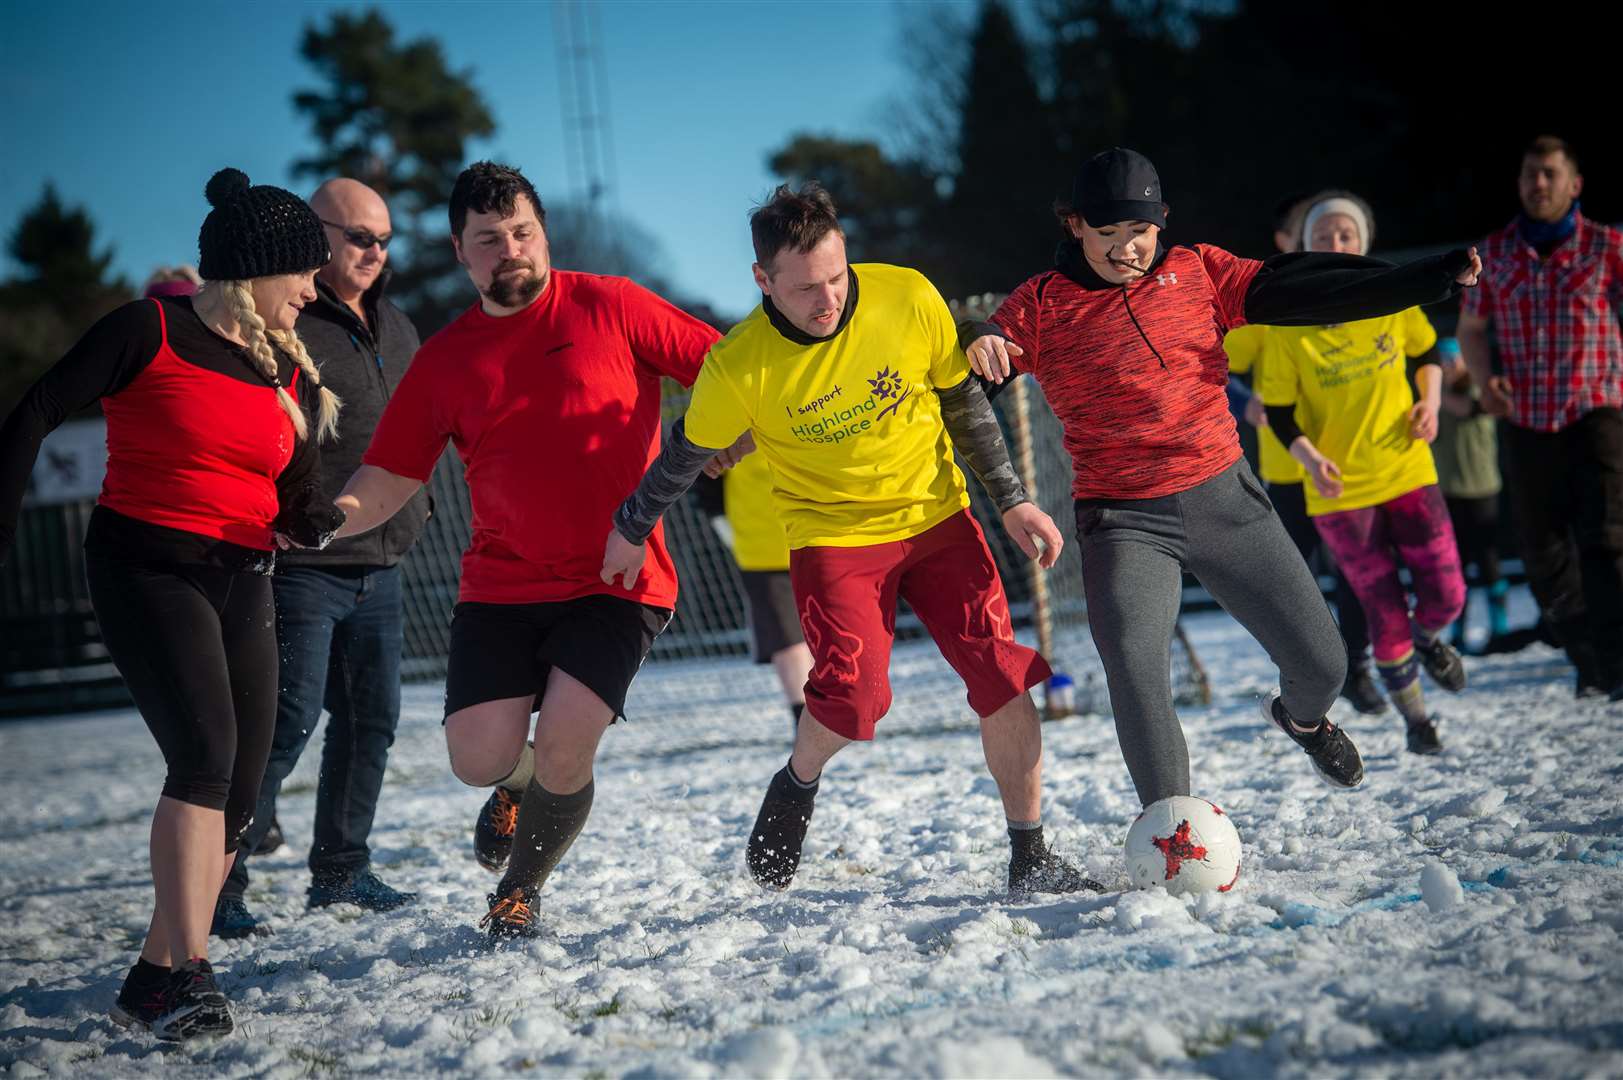 The teams battled it out on the snowy pitch.